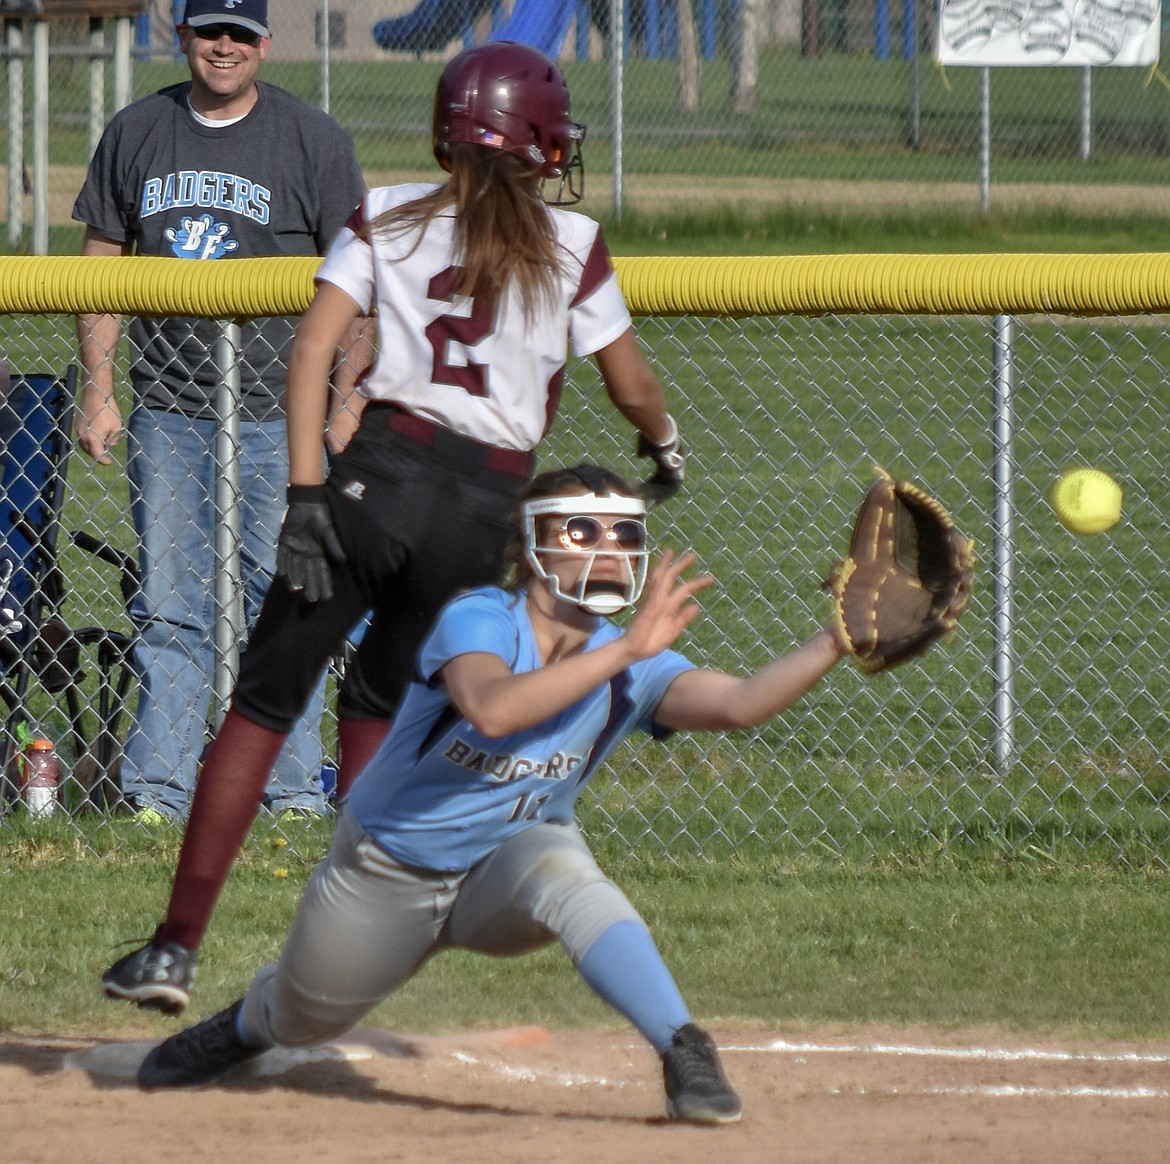 Fresman Talise Becquart makes it to first base on a single just barely ahead of the ball during Troy&#146;s 23-30 loss to Bonners Ferry Thursday. (Benjamin Kibbey/The Western News)